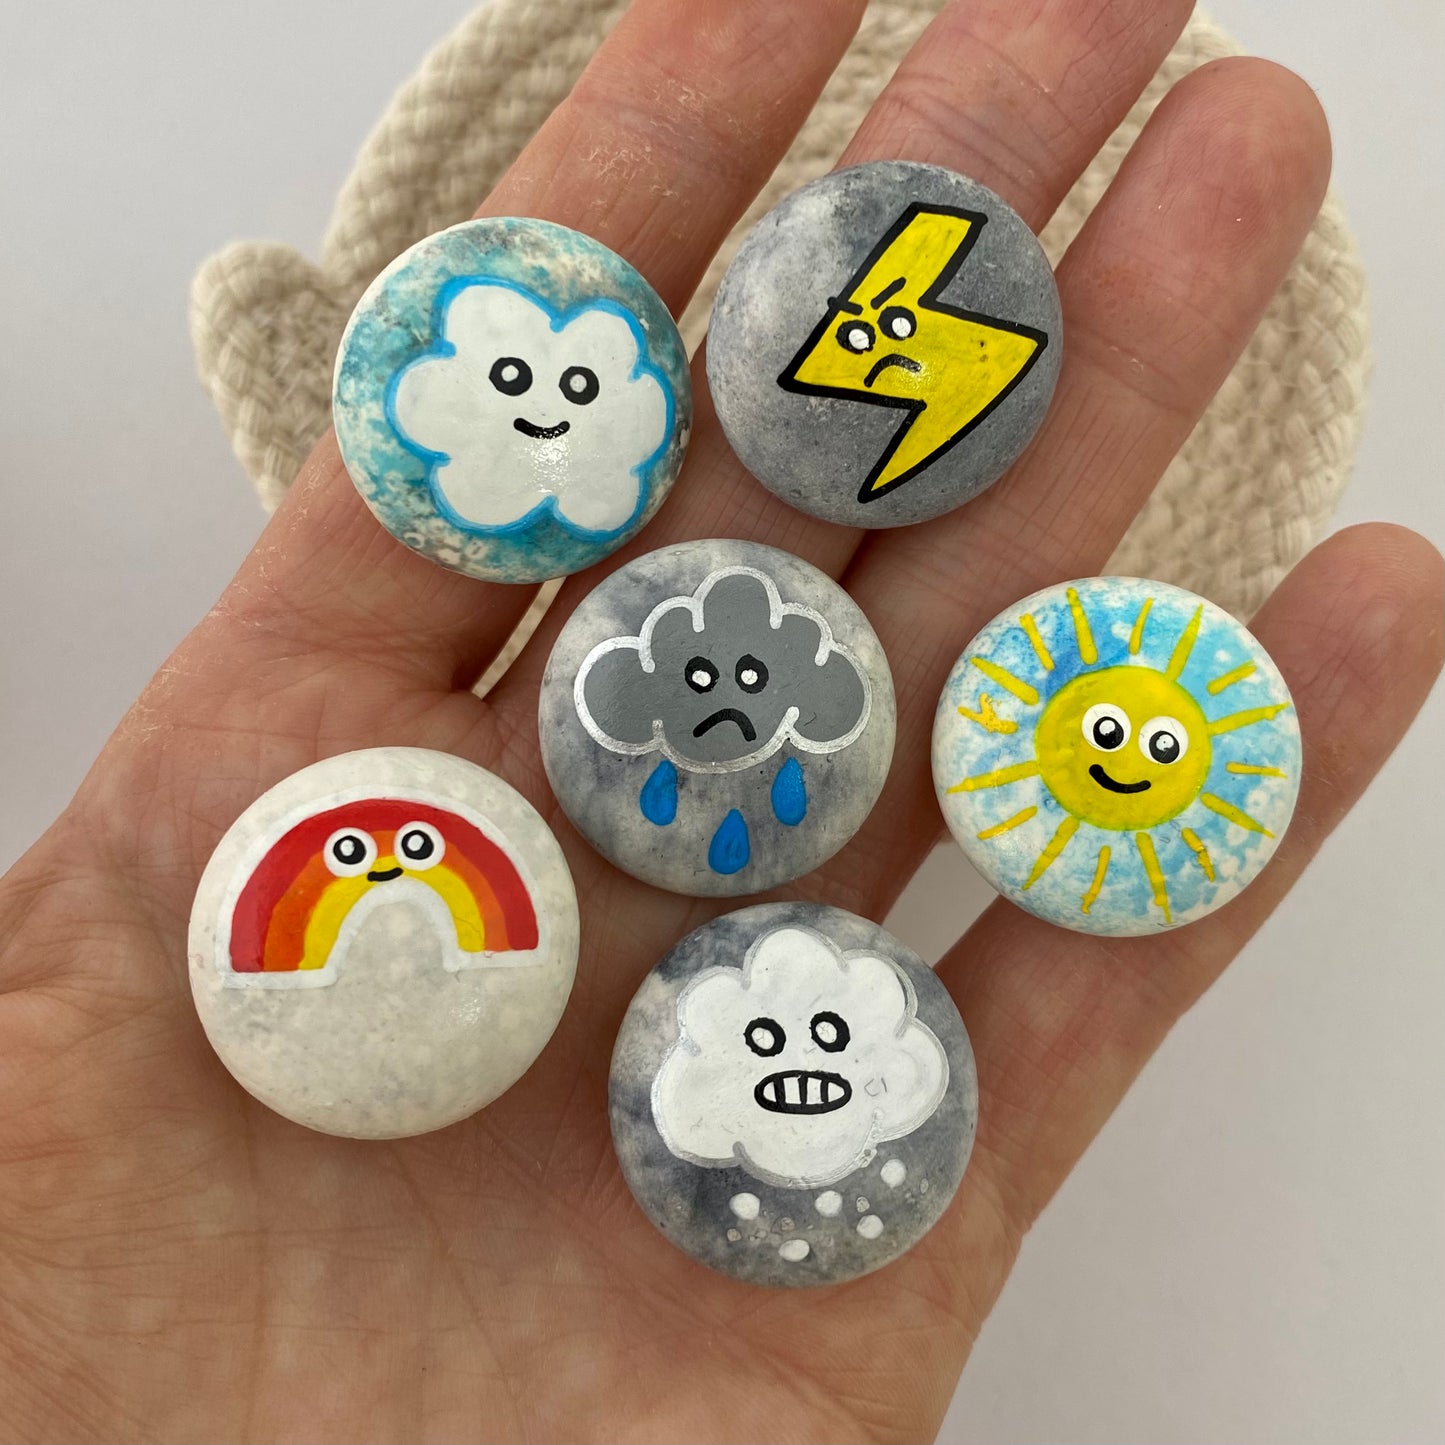 6 small hand painted weather themed pebbles held in a hand